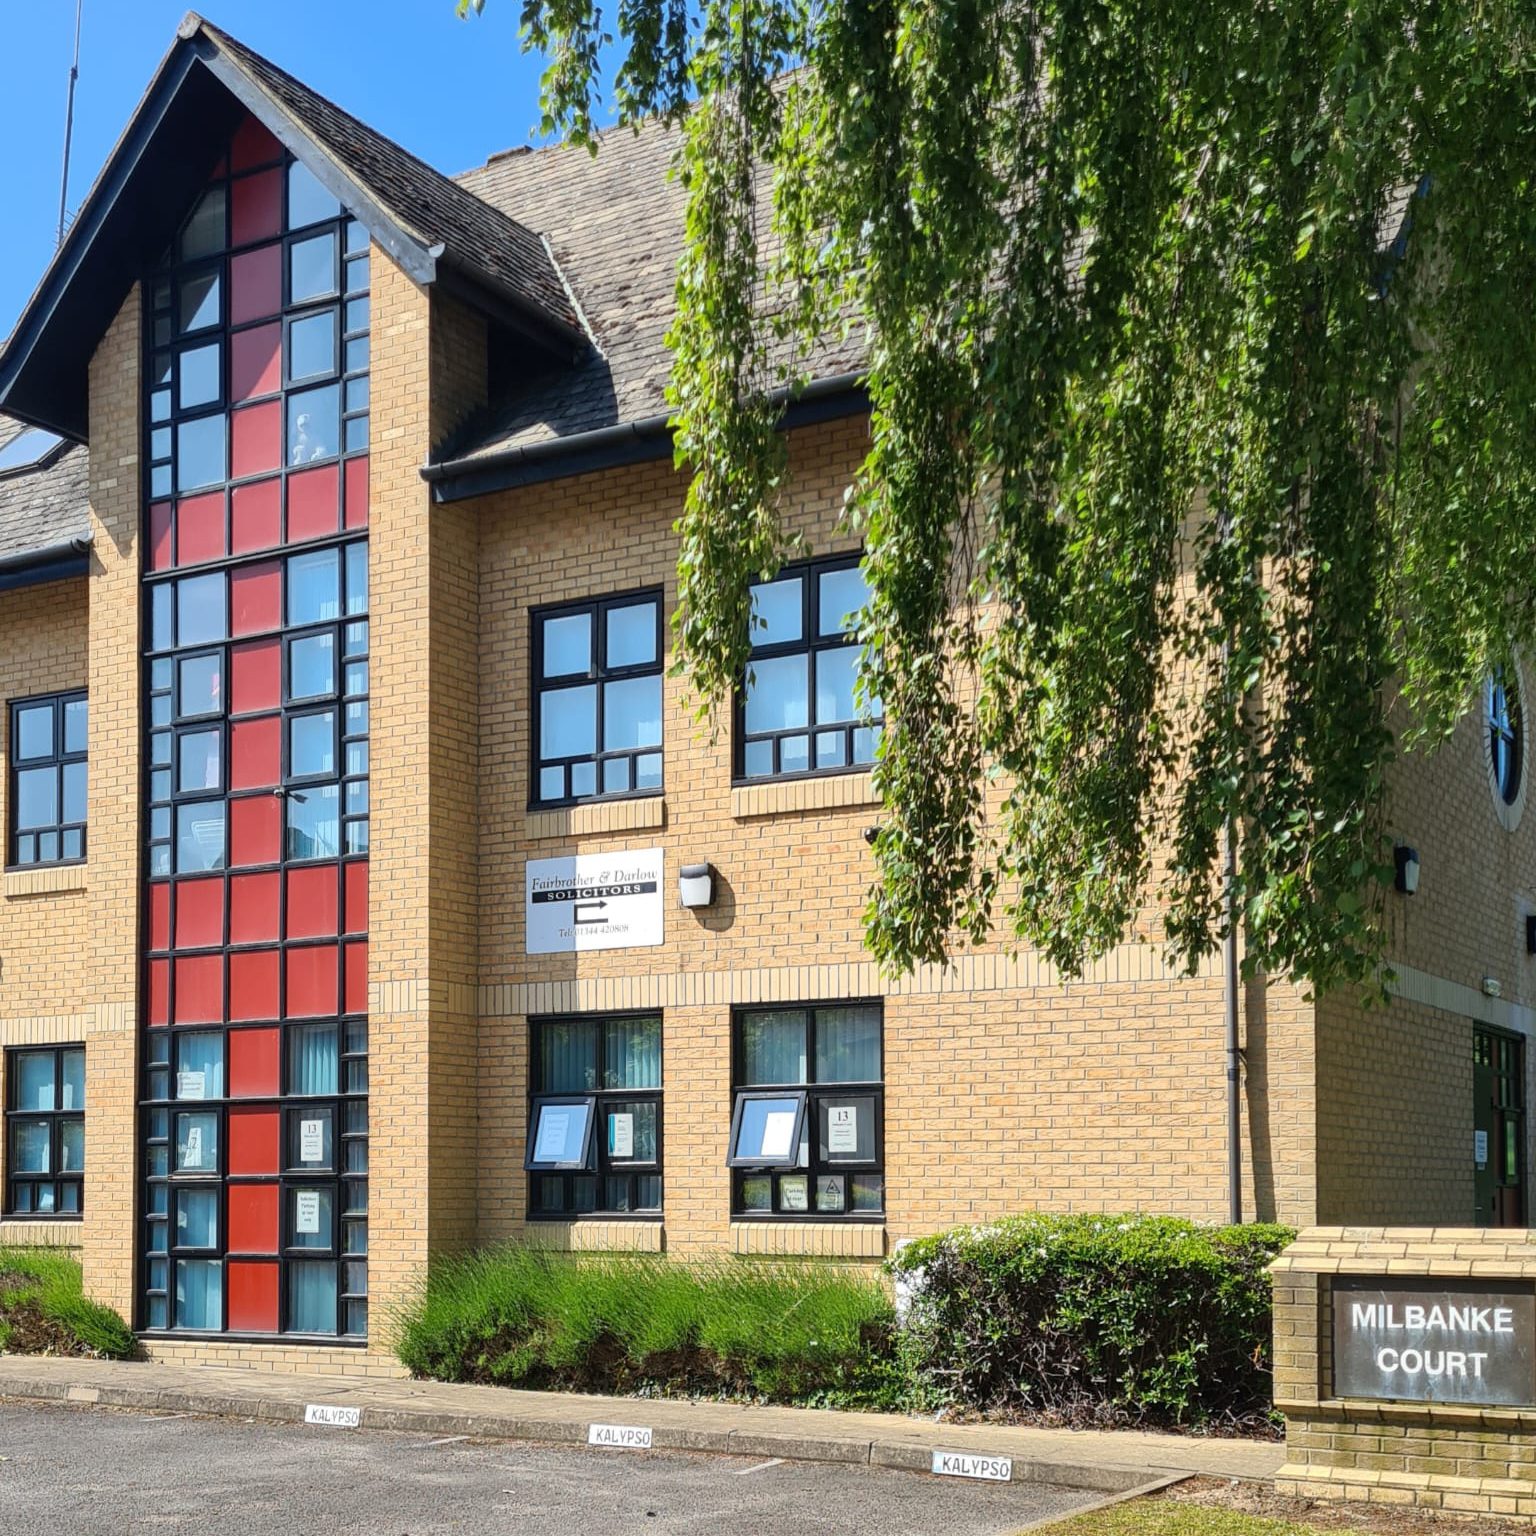 Photo of the office of Fairbrother & Darlow solicitors in Bracknell